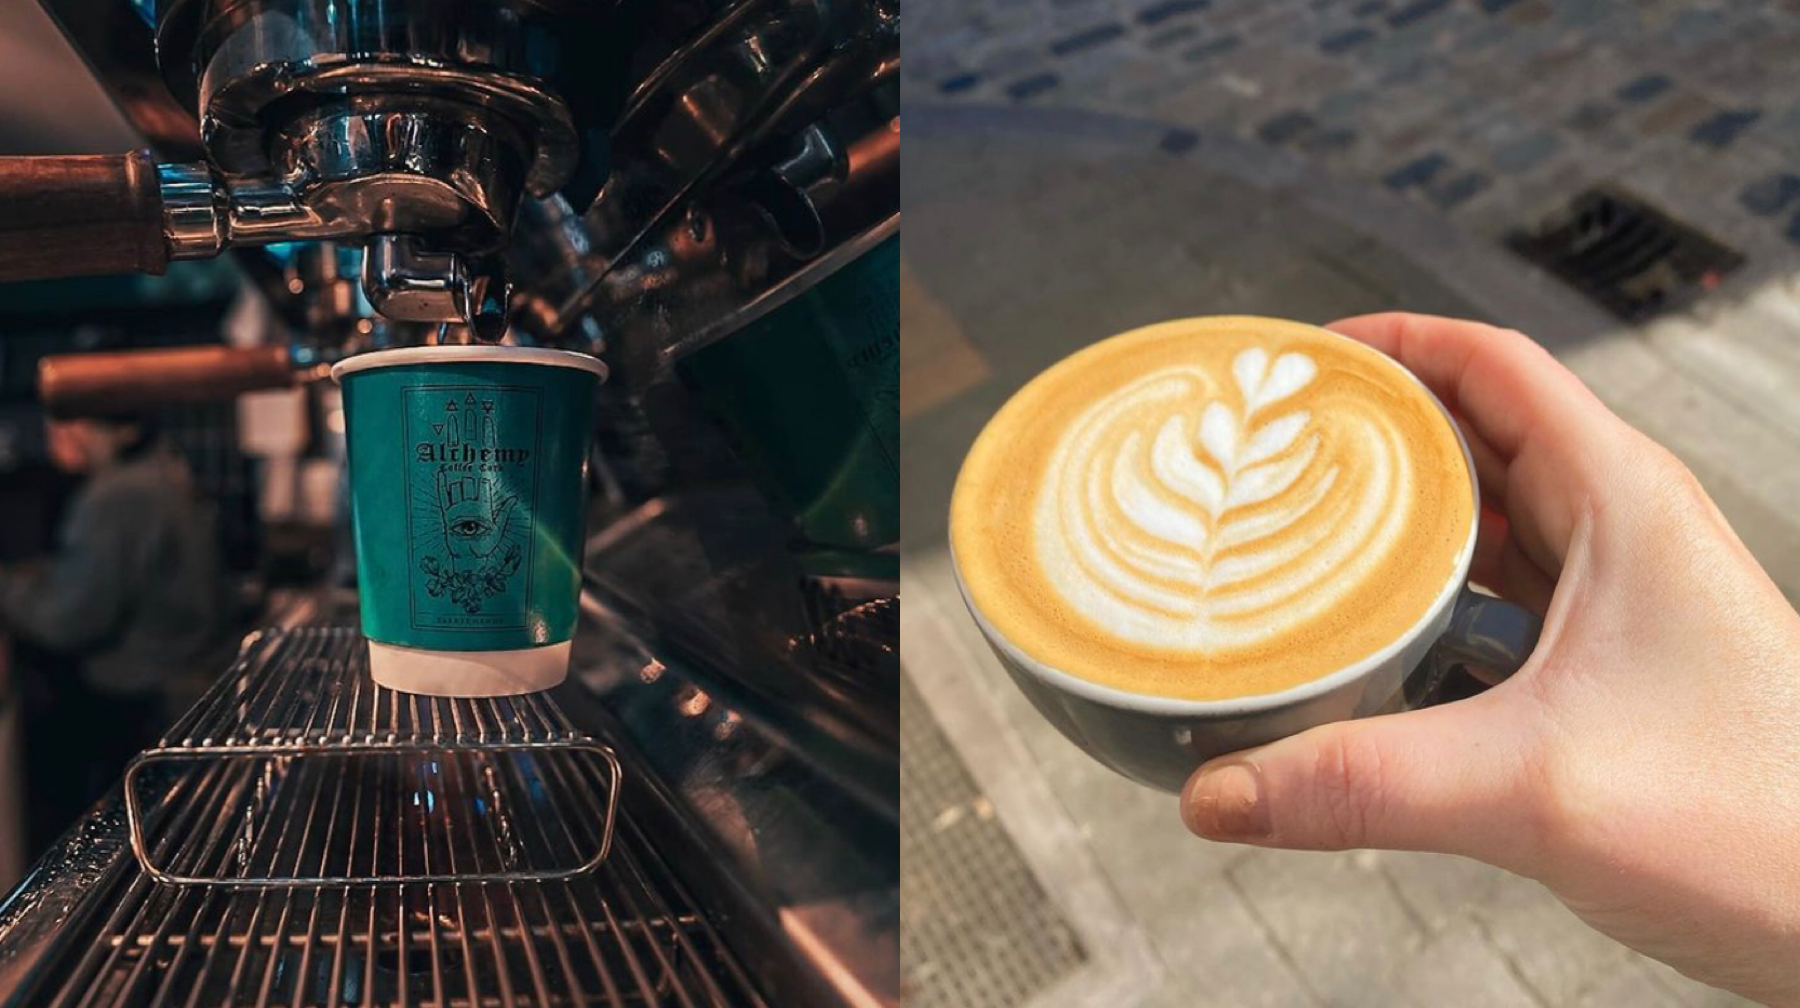 Popular Cork coffee spot Alchemy confirms they’ll be ‘floating around’ East Cork this summer